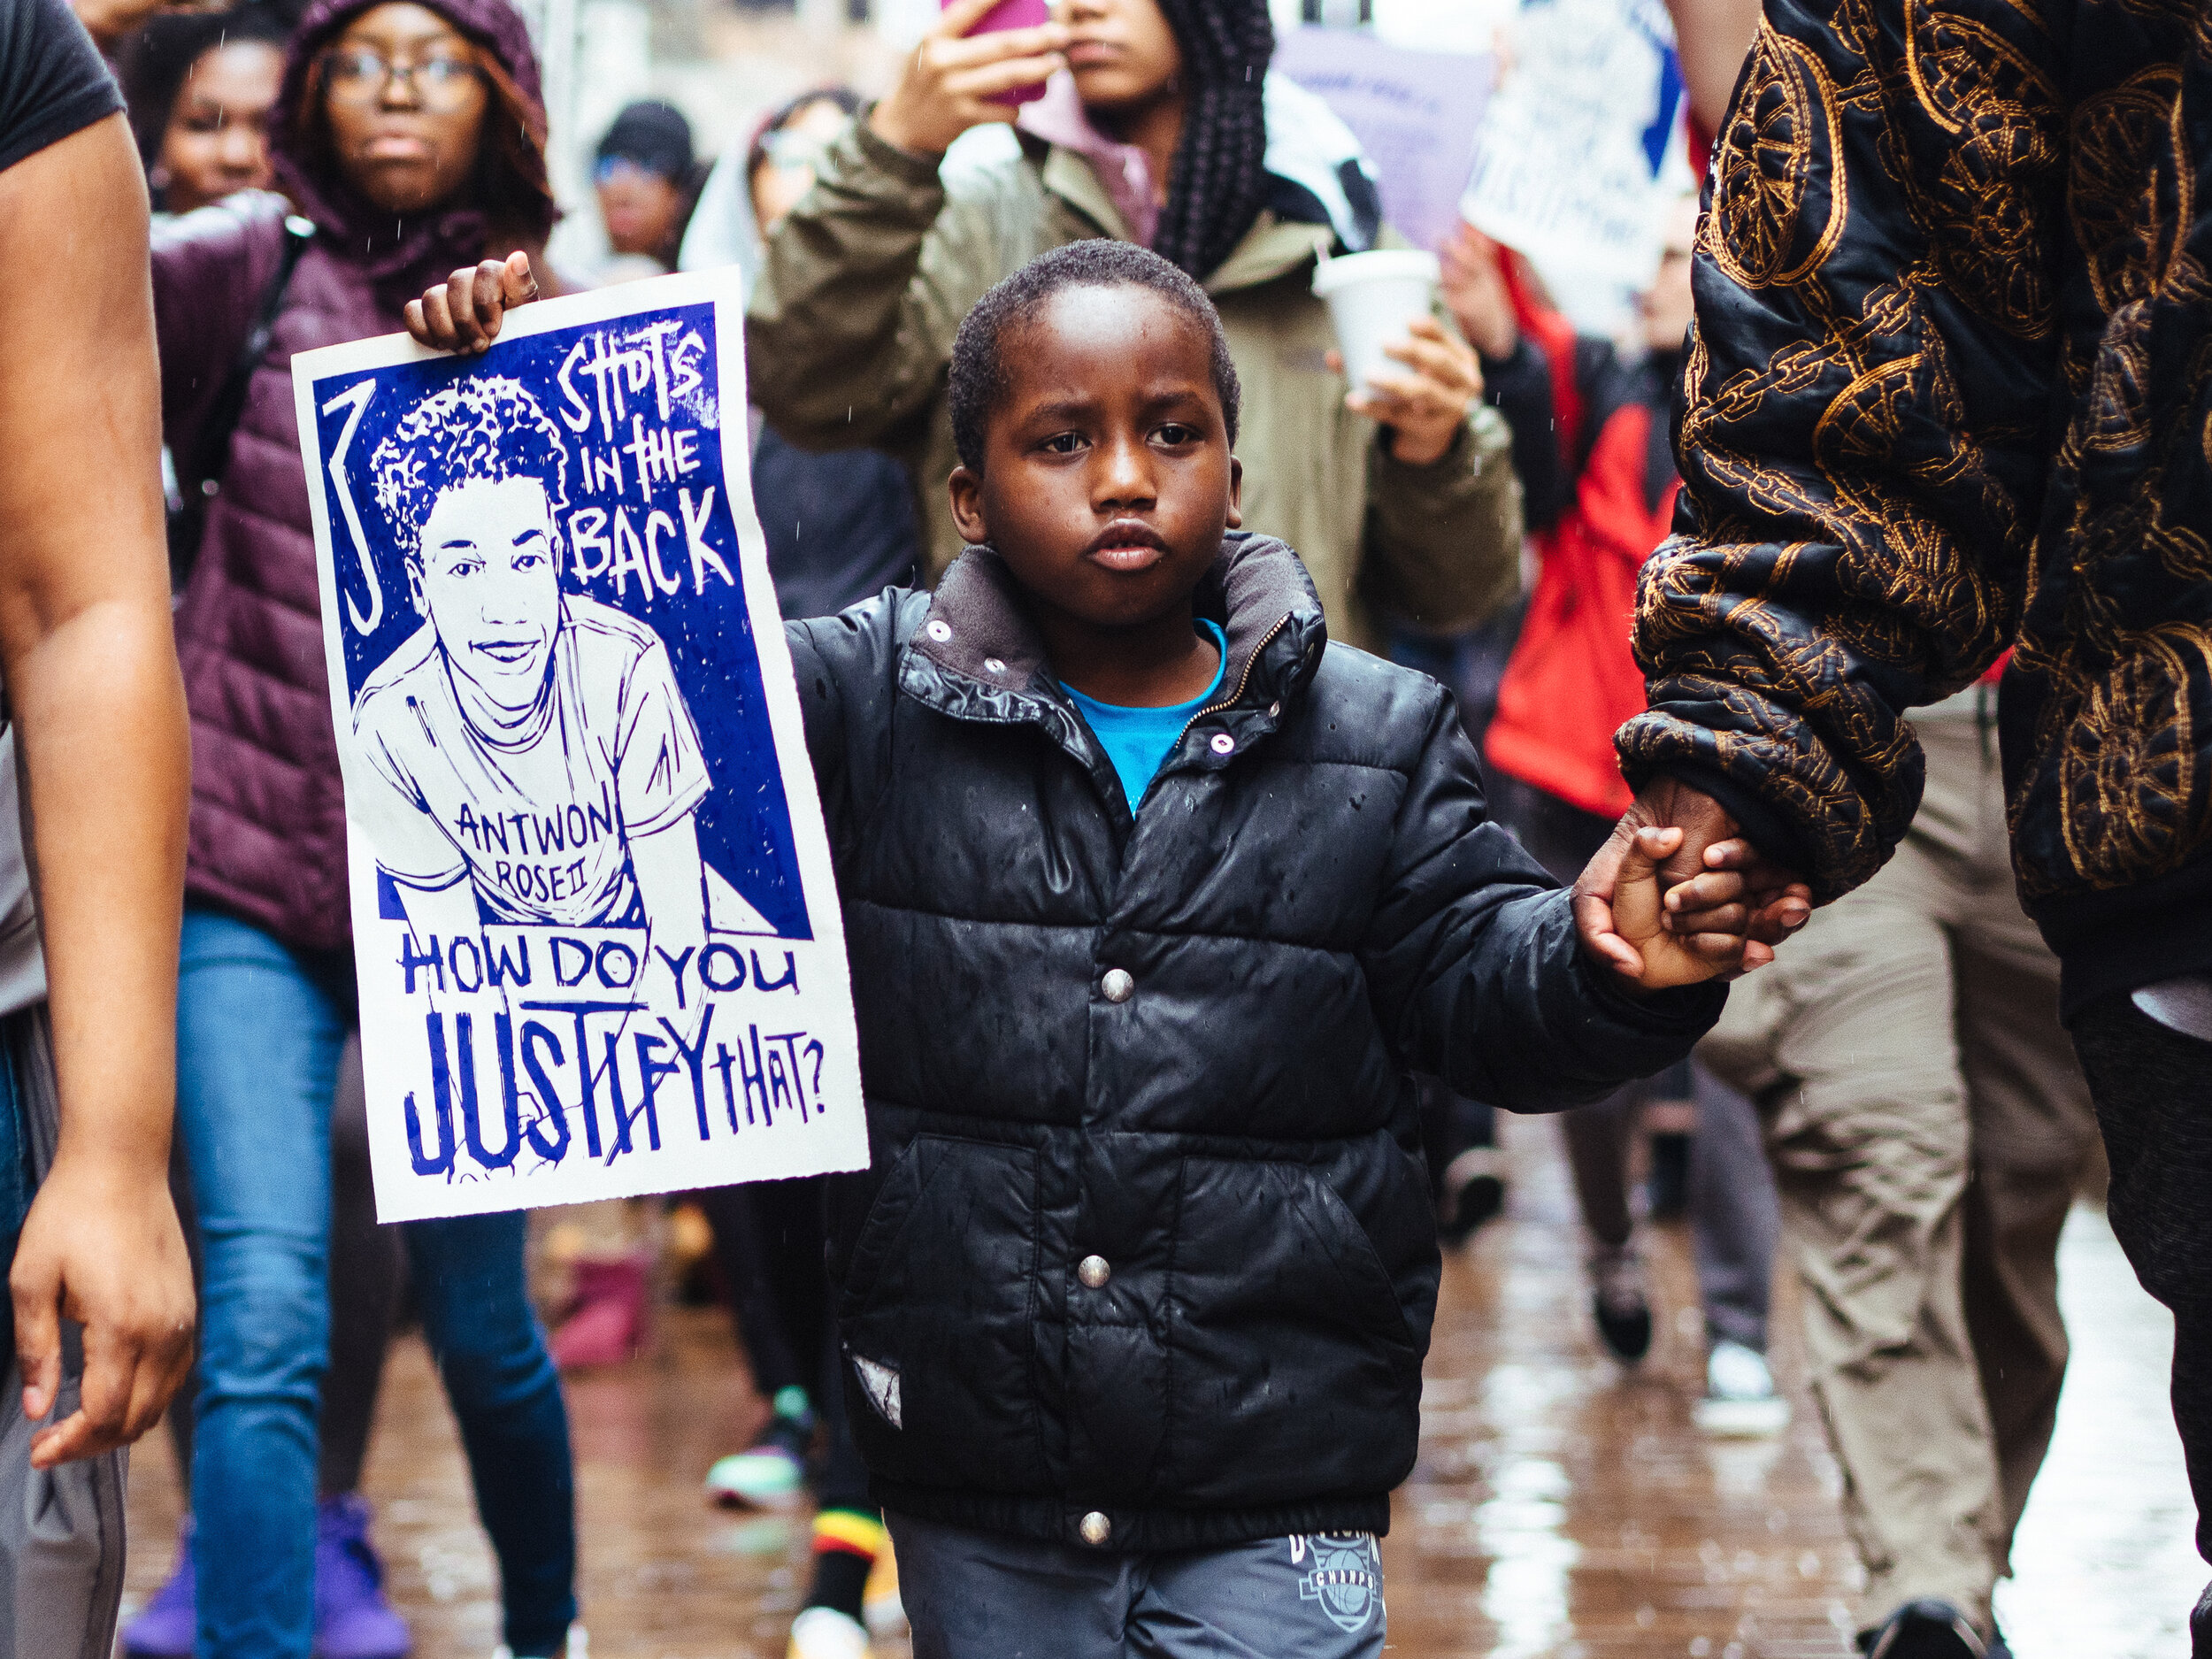  Tymair Johnson, 6, holds a sign as he marches down Grant Street in Downtown Pittsburgh during a student led walkout in remembrance of seventeen year old Antwon Rose II, on Monday, March 25, 2019.   Rose was fatally shot in the back three times by Ea